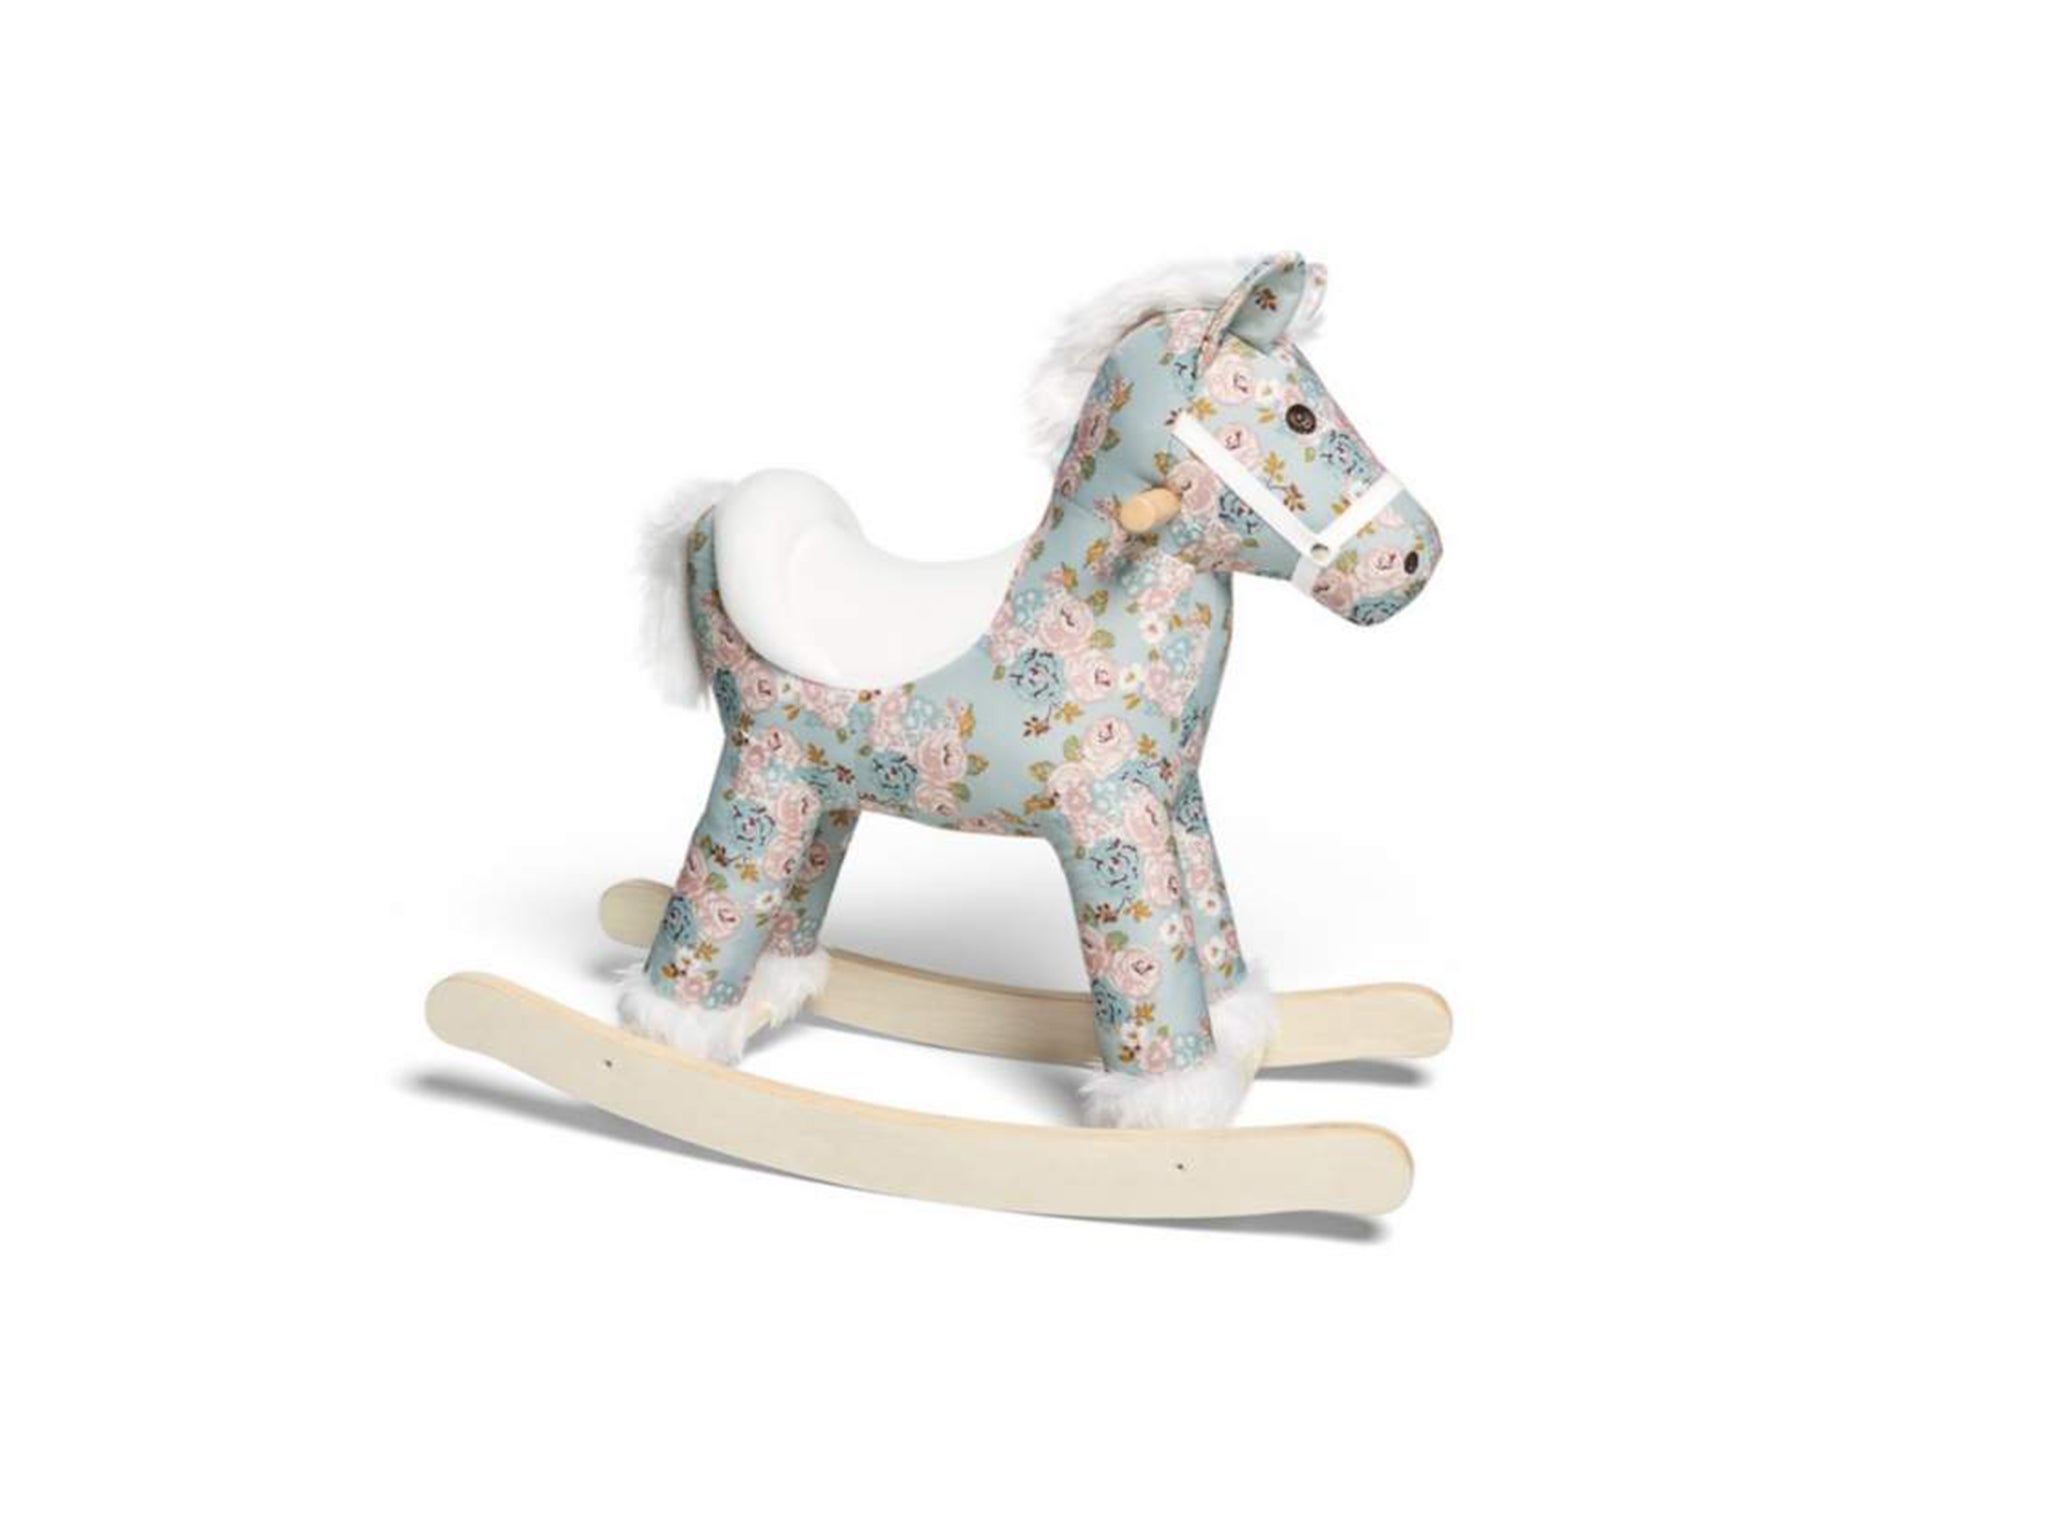 Rocking horses have been around for centuries but never seem to go out of style